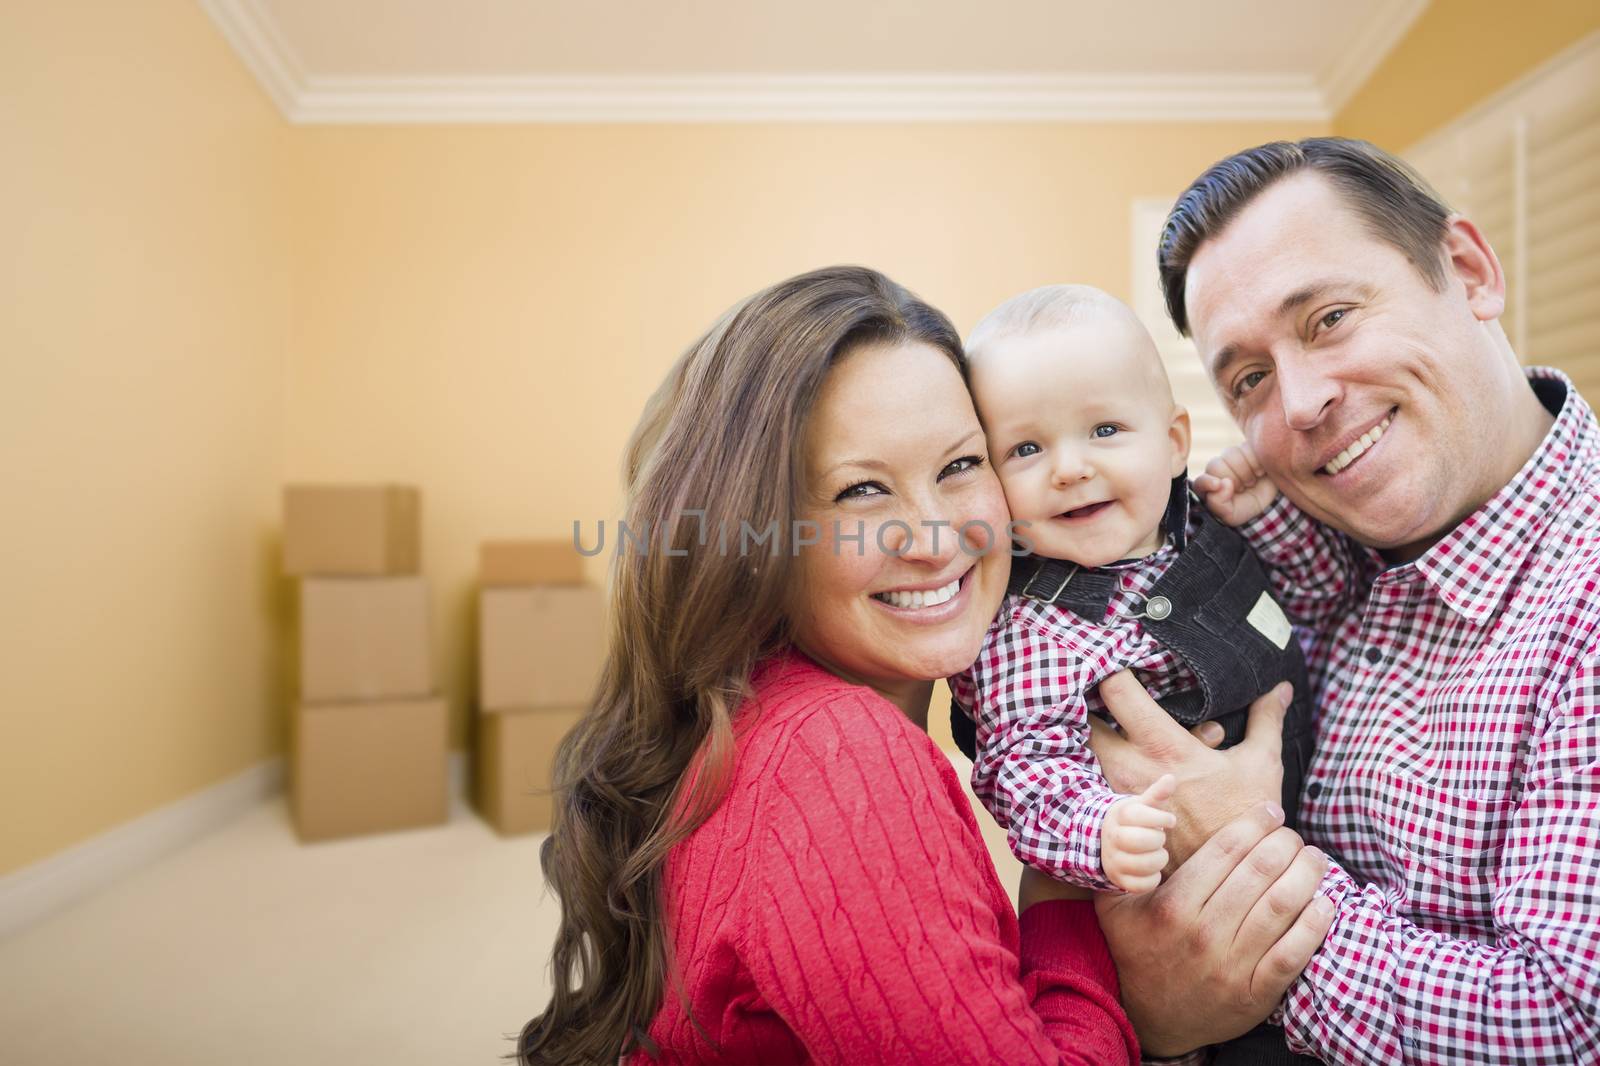 Happy Young Family In Room With Moving Boxes.